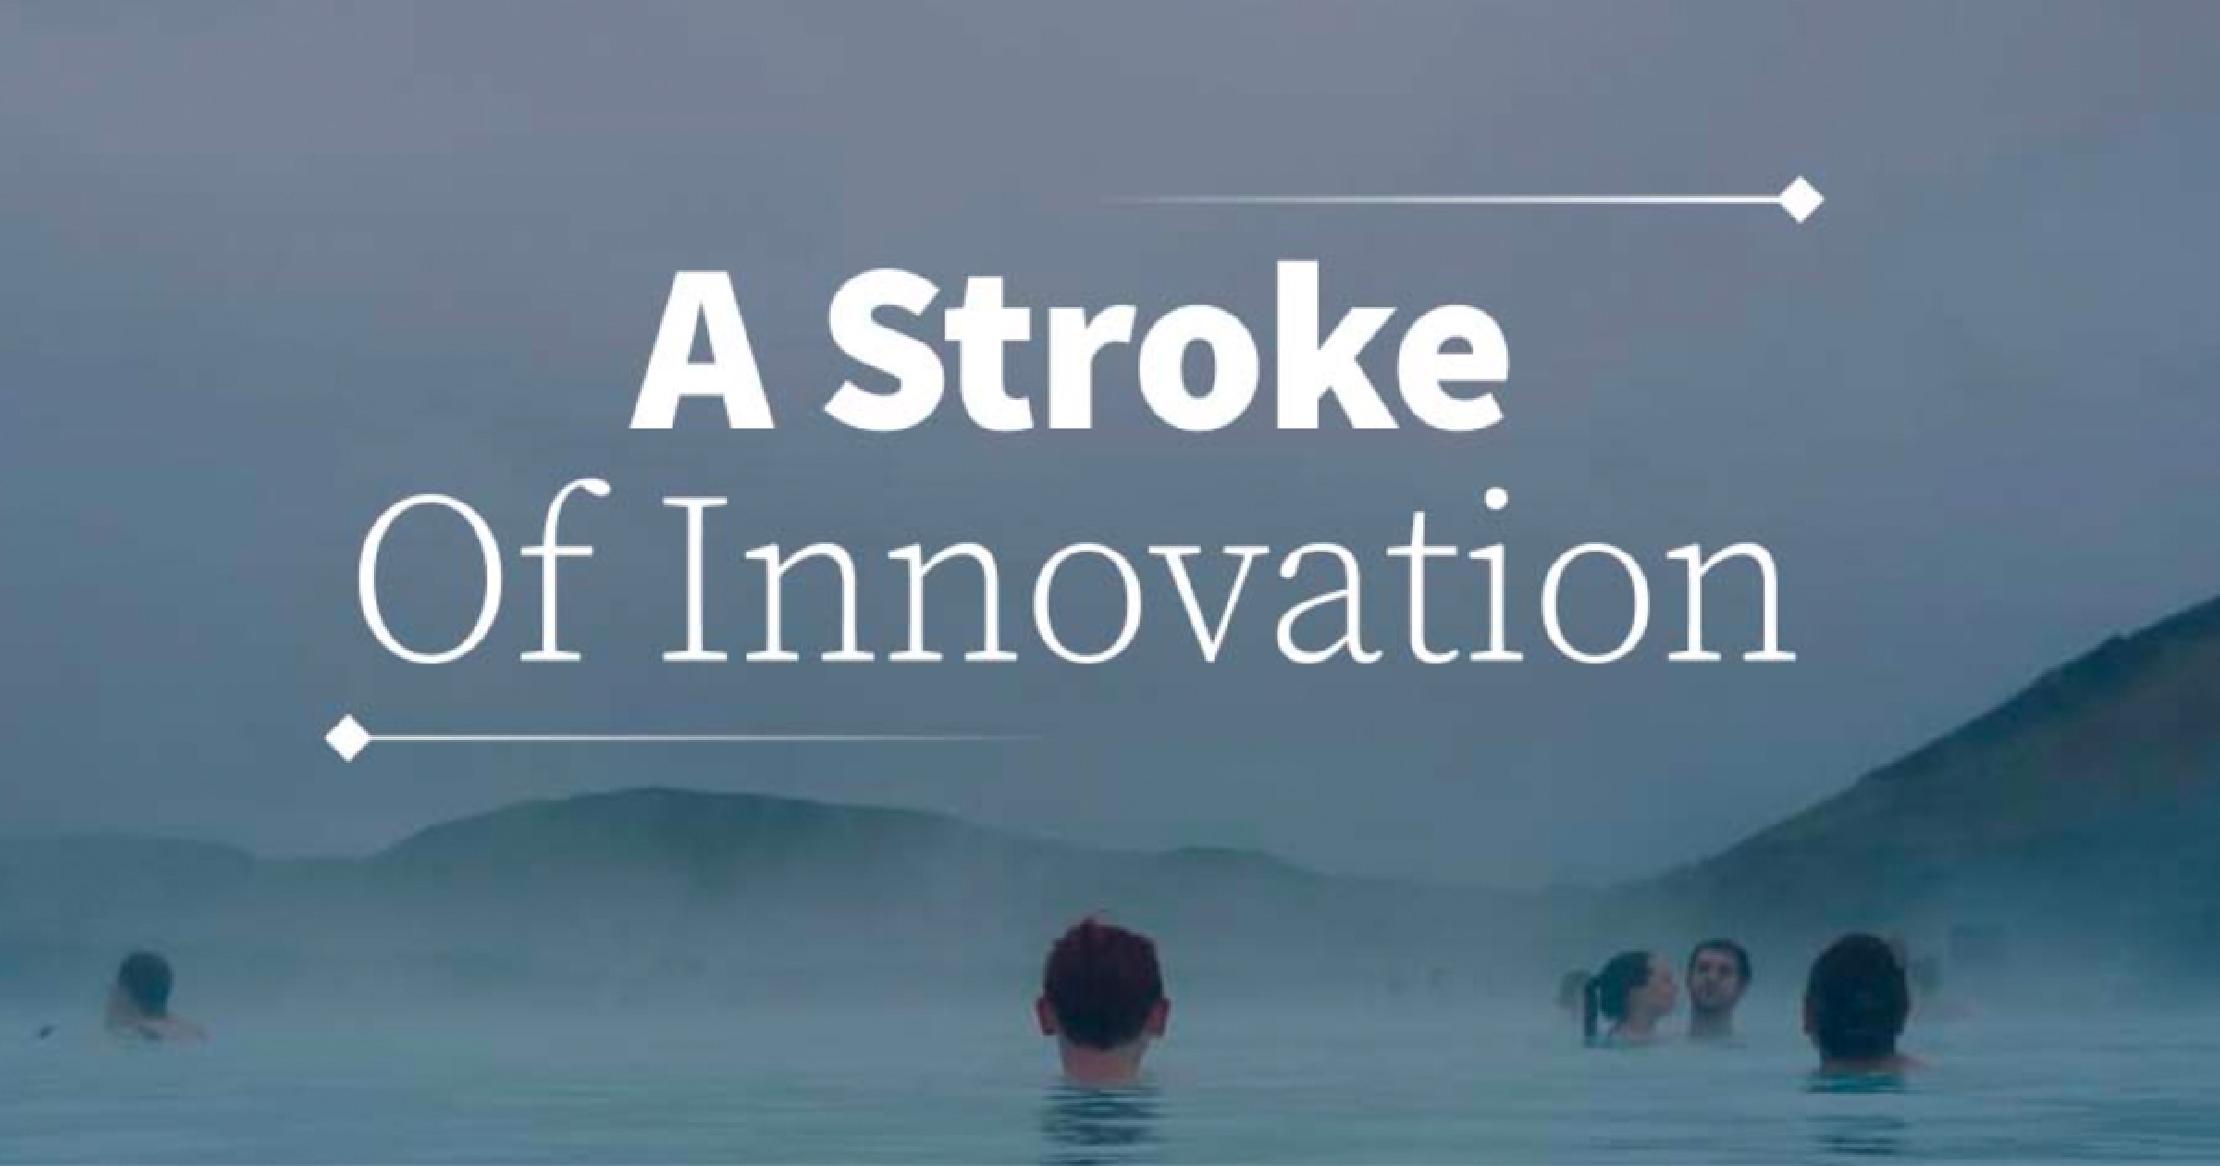 Thumbnail Screenshot image of the video with people swimming in a geothermal pool and text that says A Stroke of Innovation